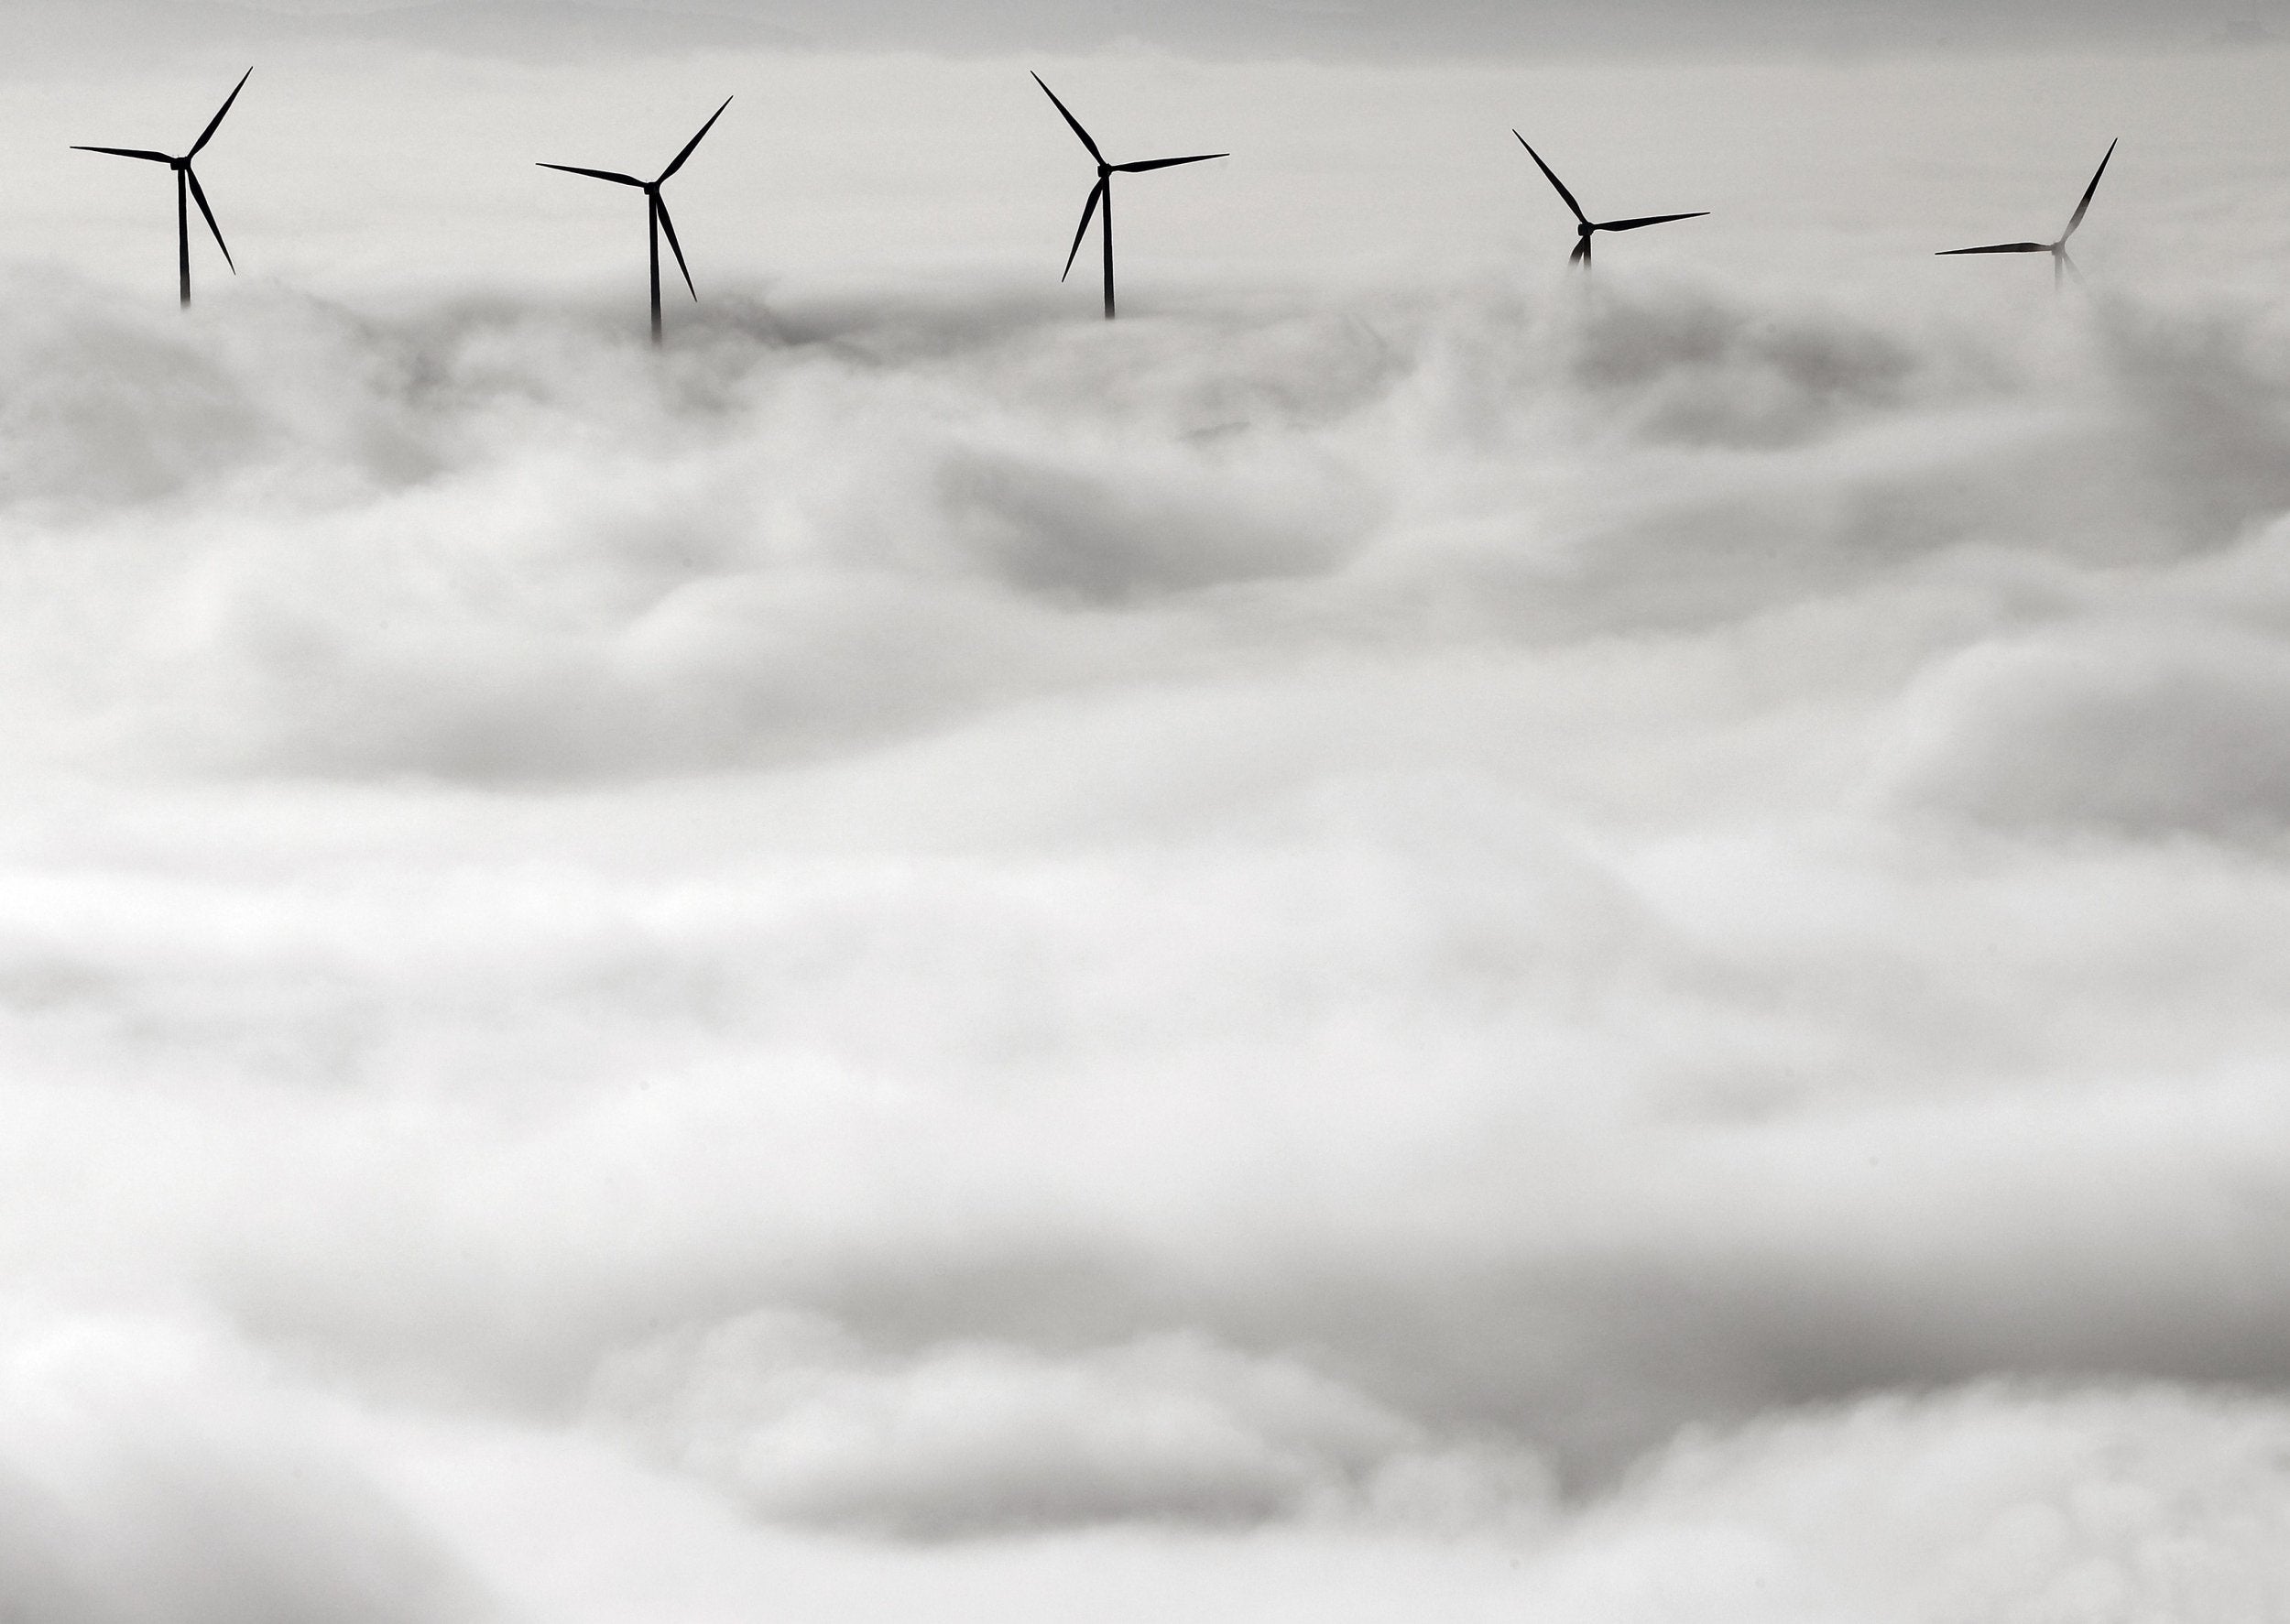 Wind turbines stand out from a dense blanket of fog covering Pamplona, northern Spain